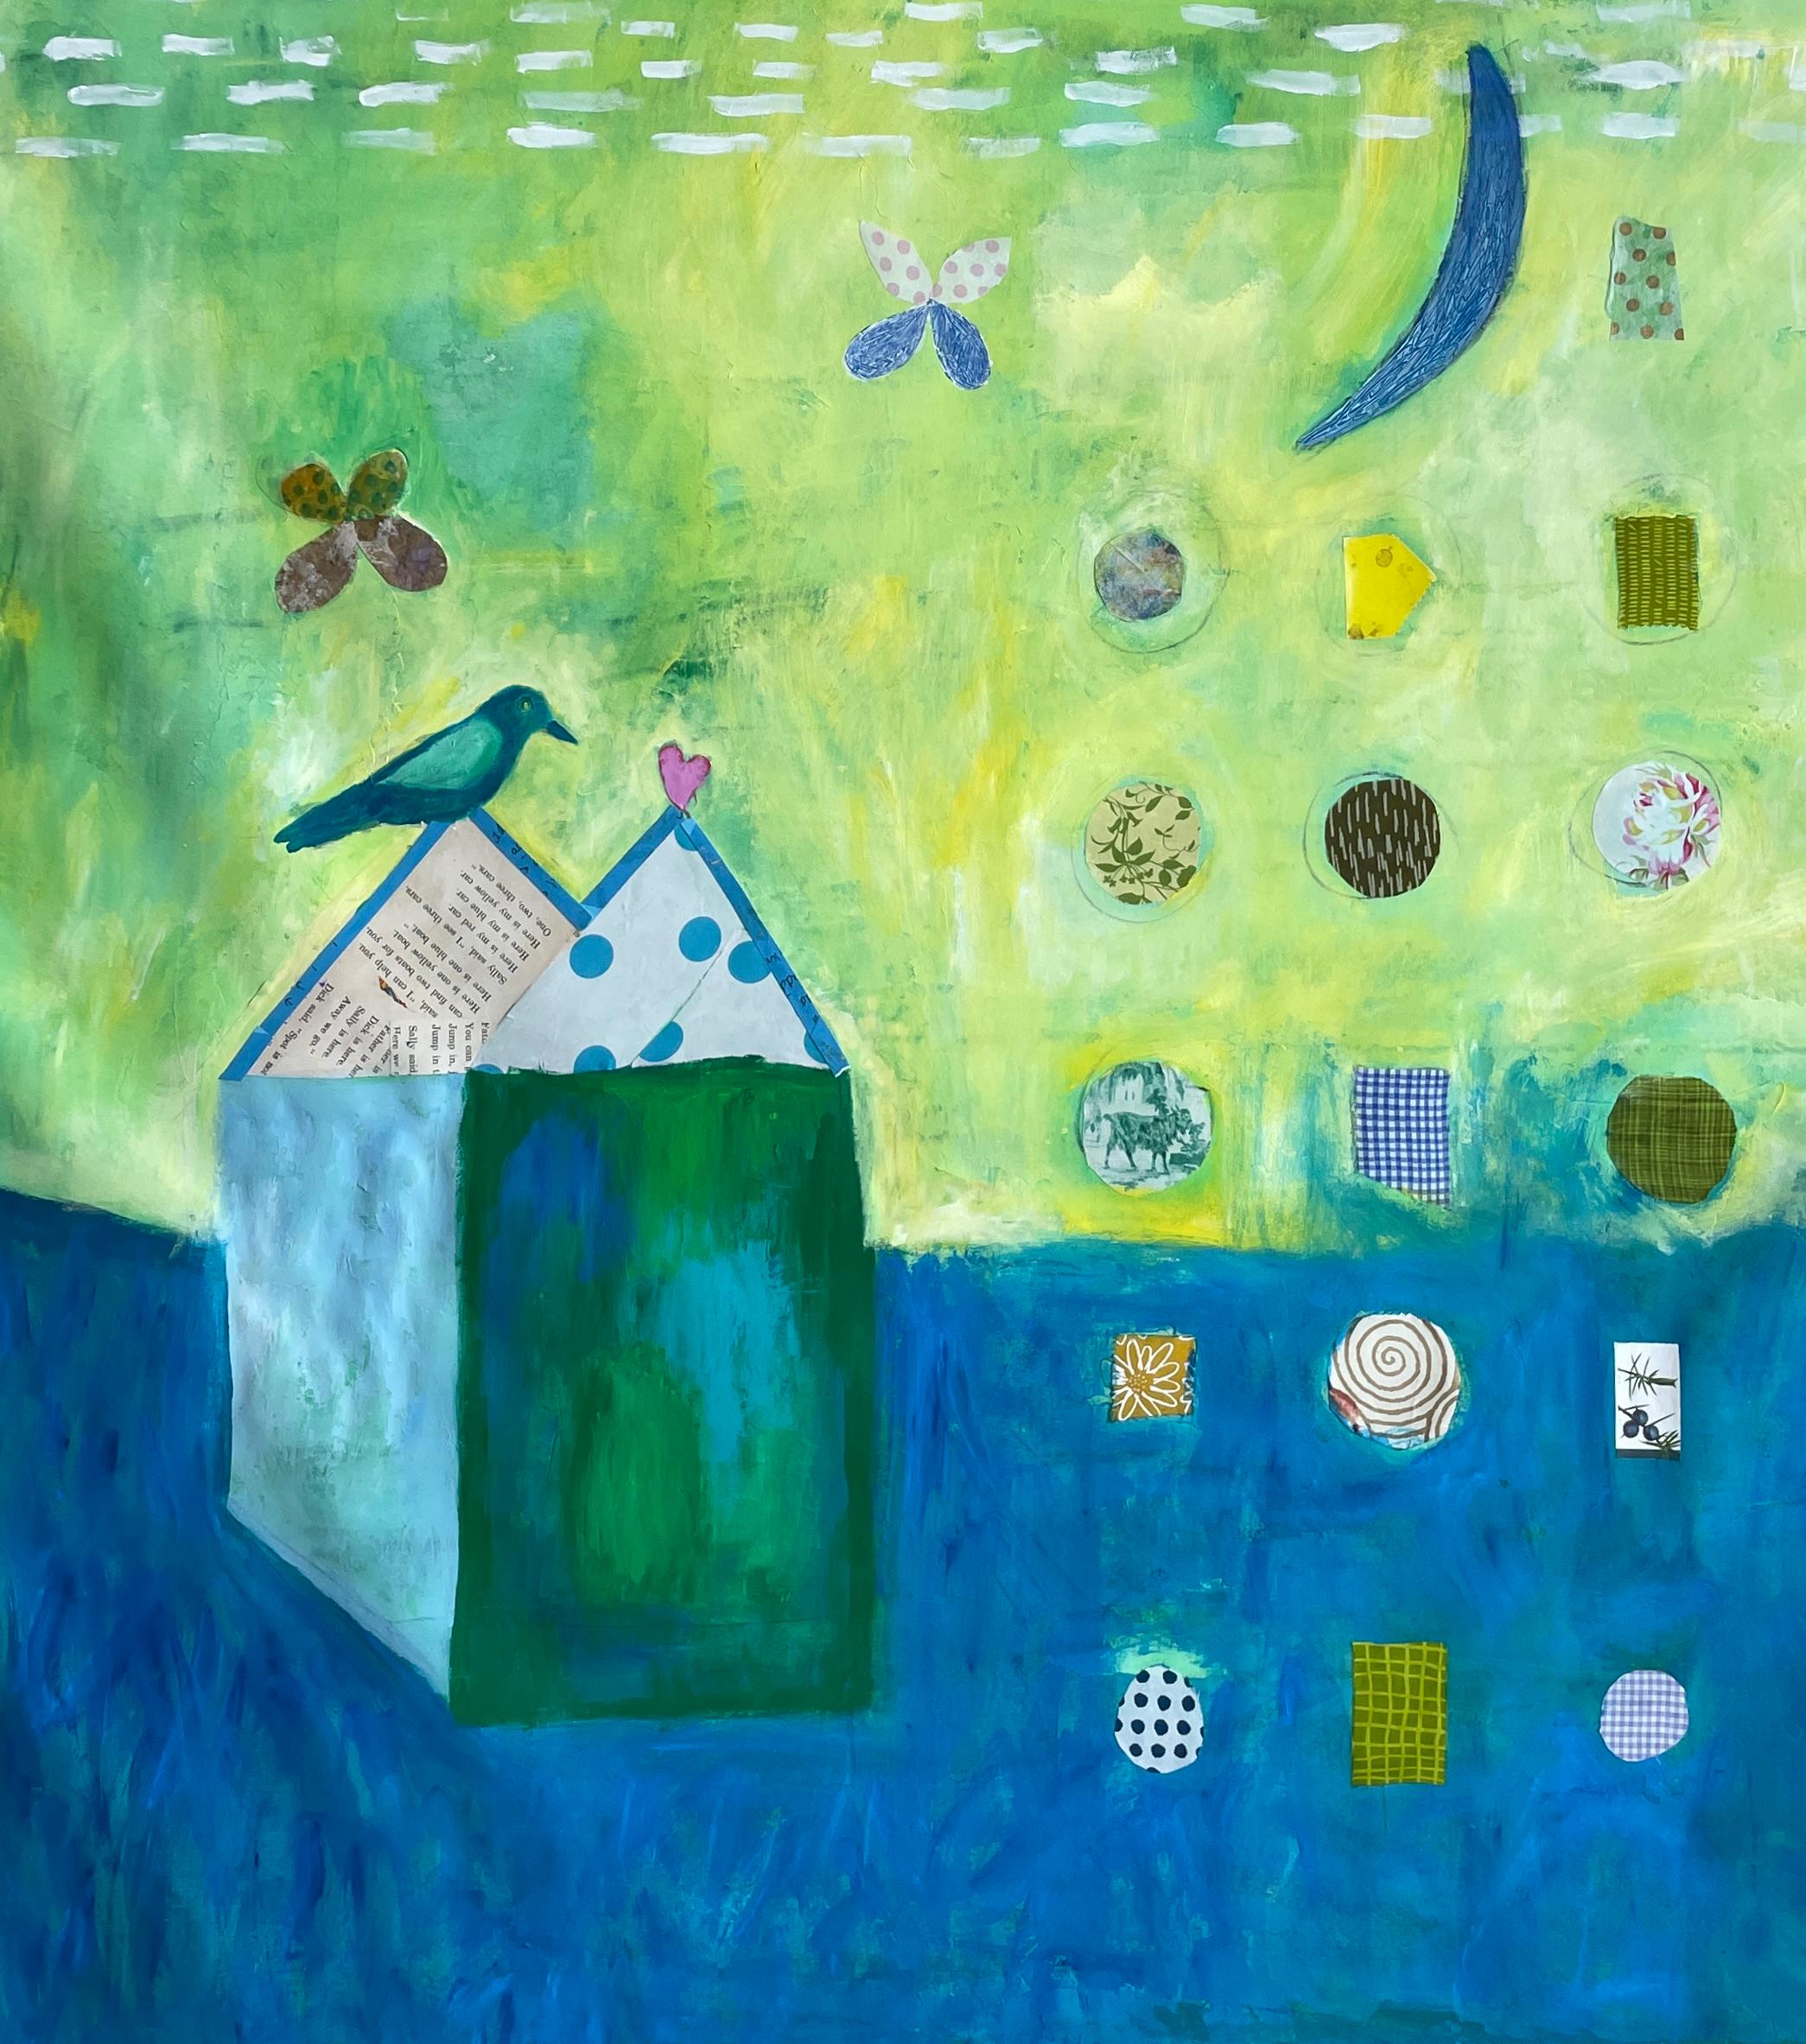 Pam Smilow Abstract Painting - Floating House Series: Blue Yellow Bird